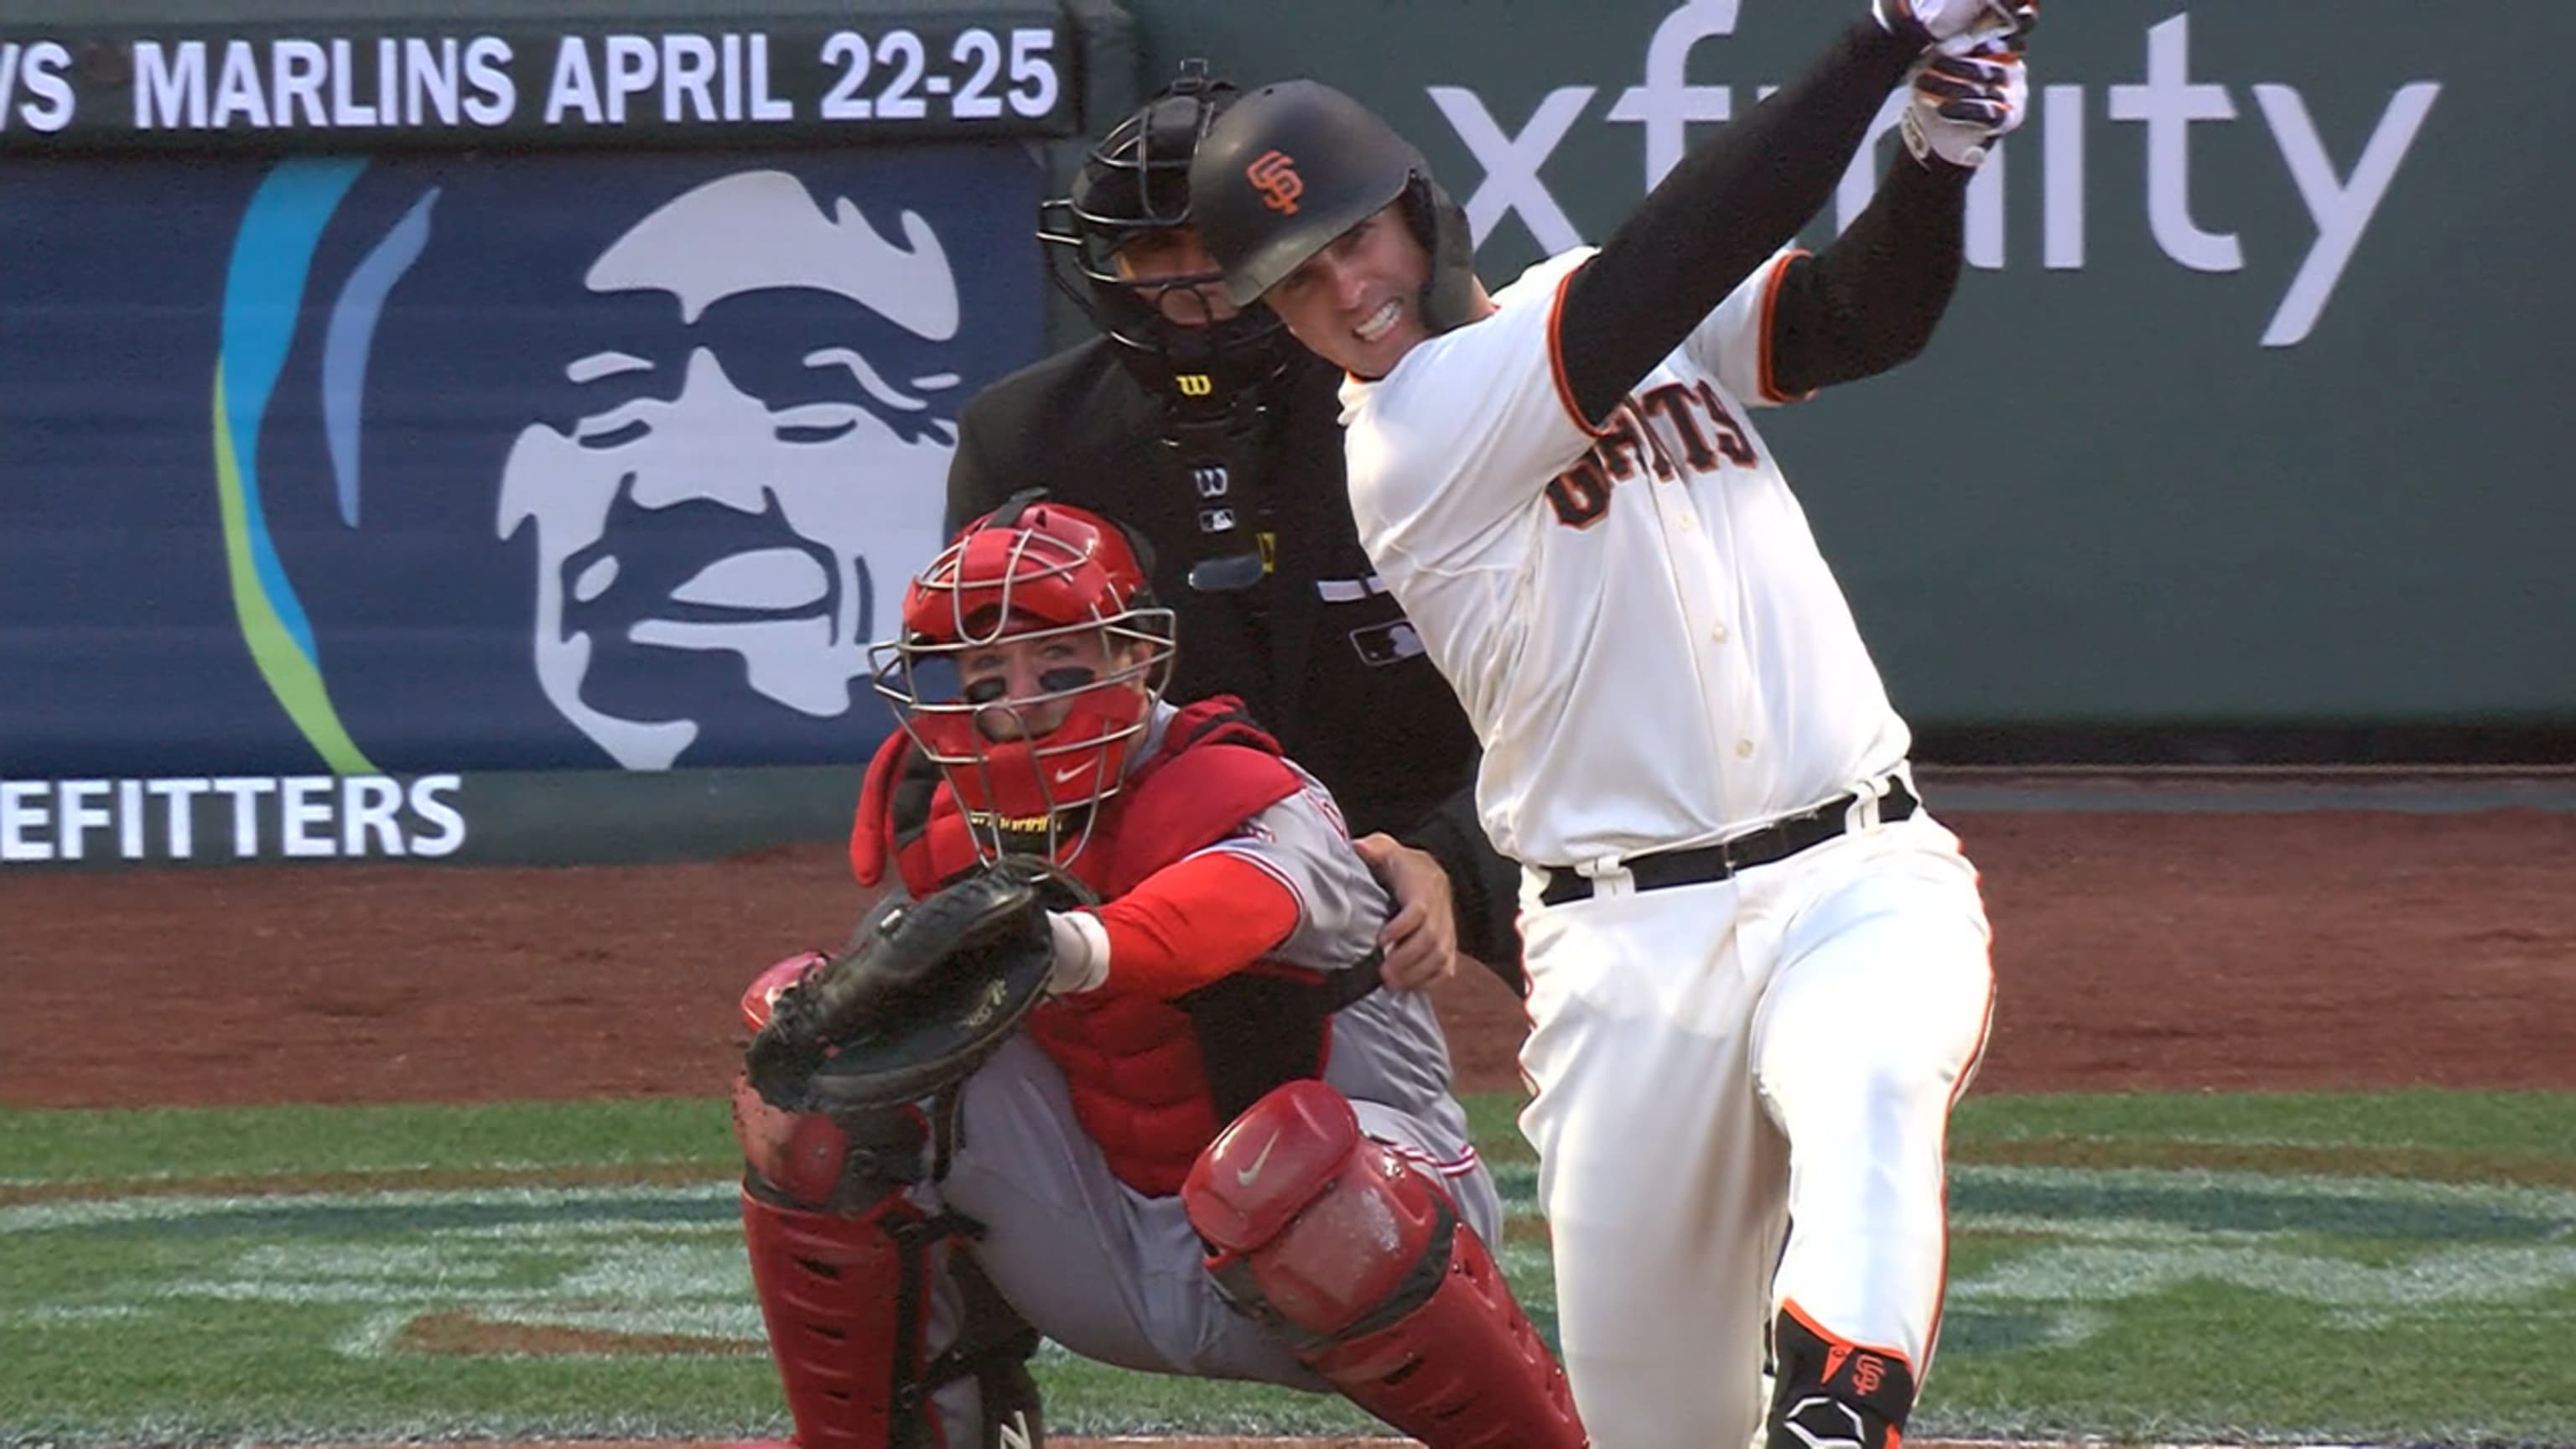 San Francisco Giants Stat of the Day, August 2021